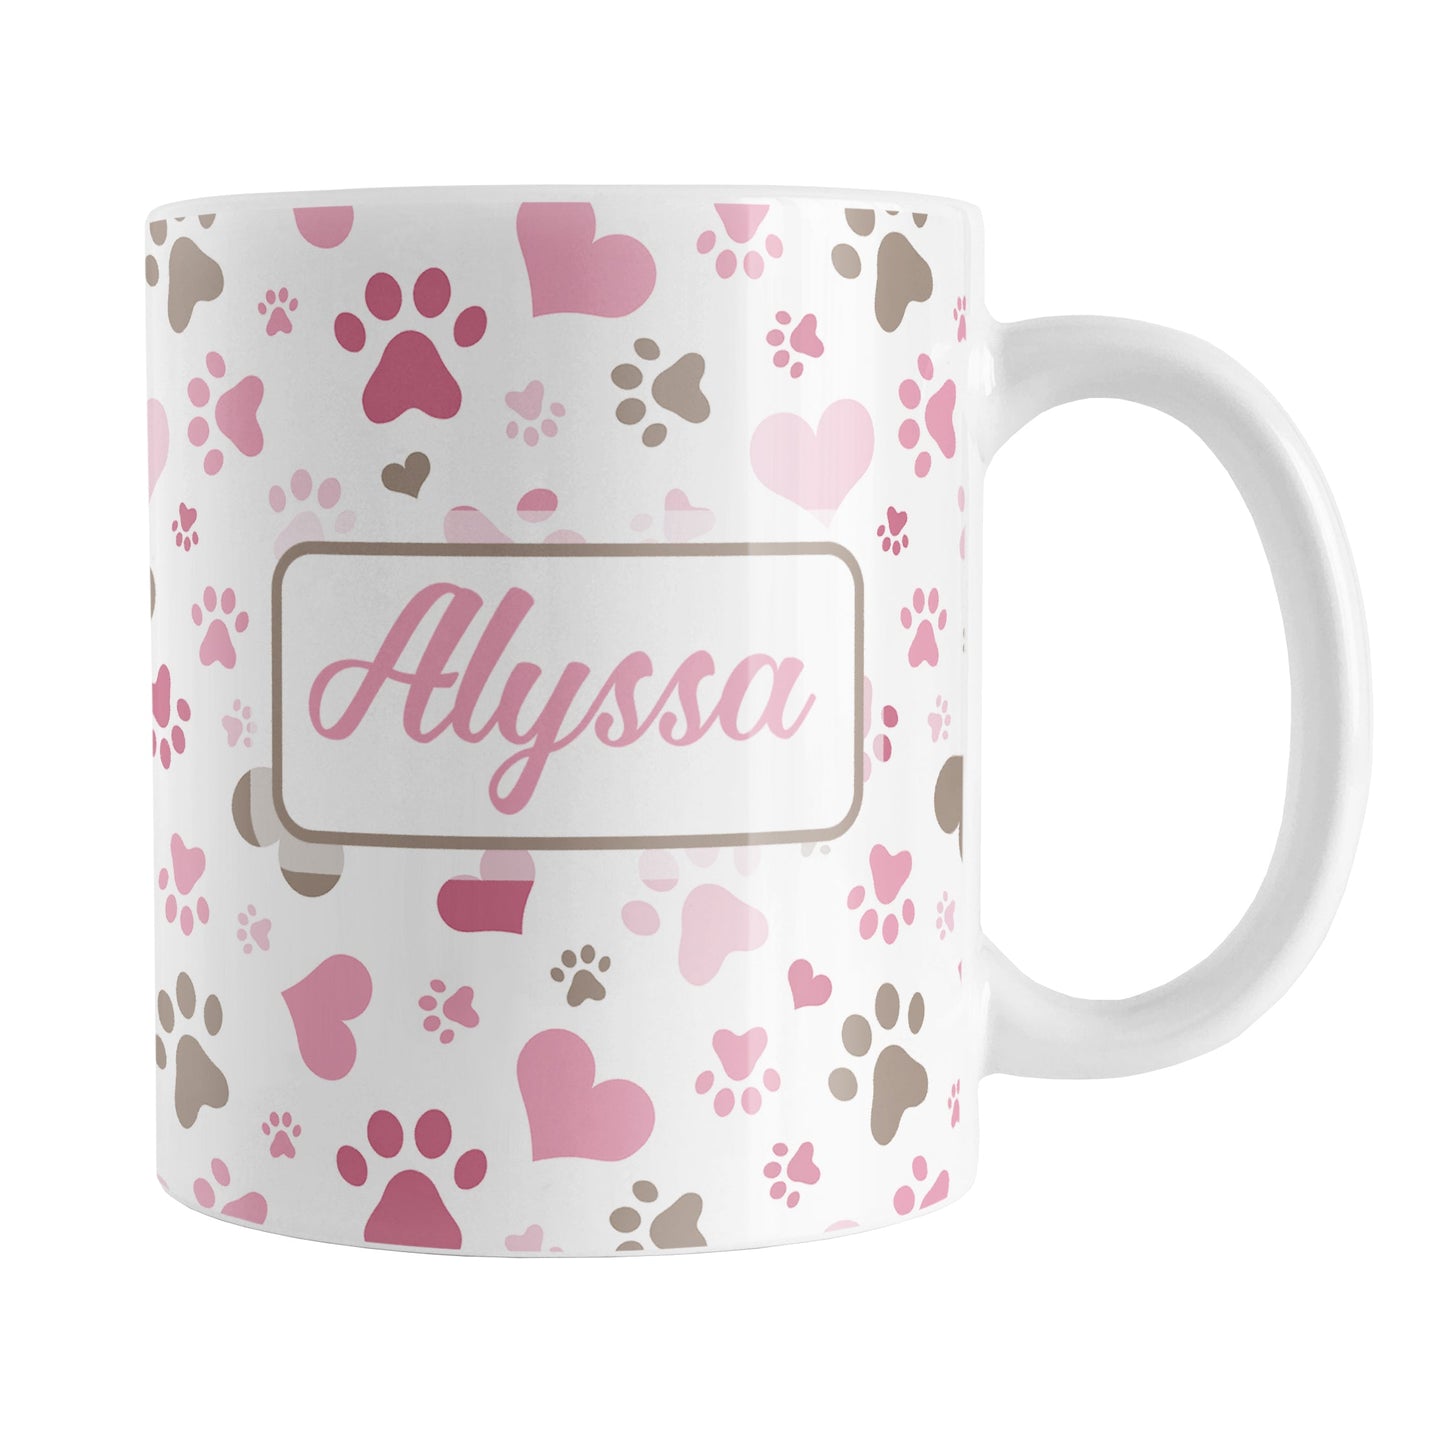 Personalized Pink Hearts and Paw Prints Mug (11oz) at Amy's Coffee Mugs. A ceramic coffee mug designed with a pattern of cute hearts and paw prints in pink and brown that wraps around the mug to the handle. Your name is personalized in pink on both sides of the mug.